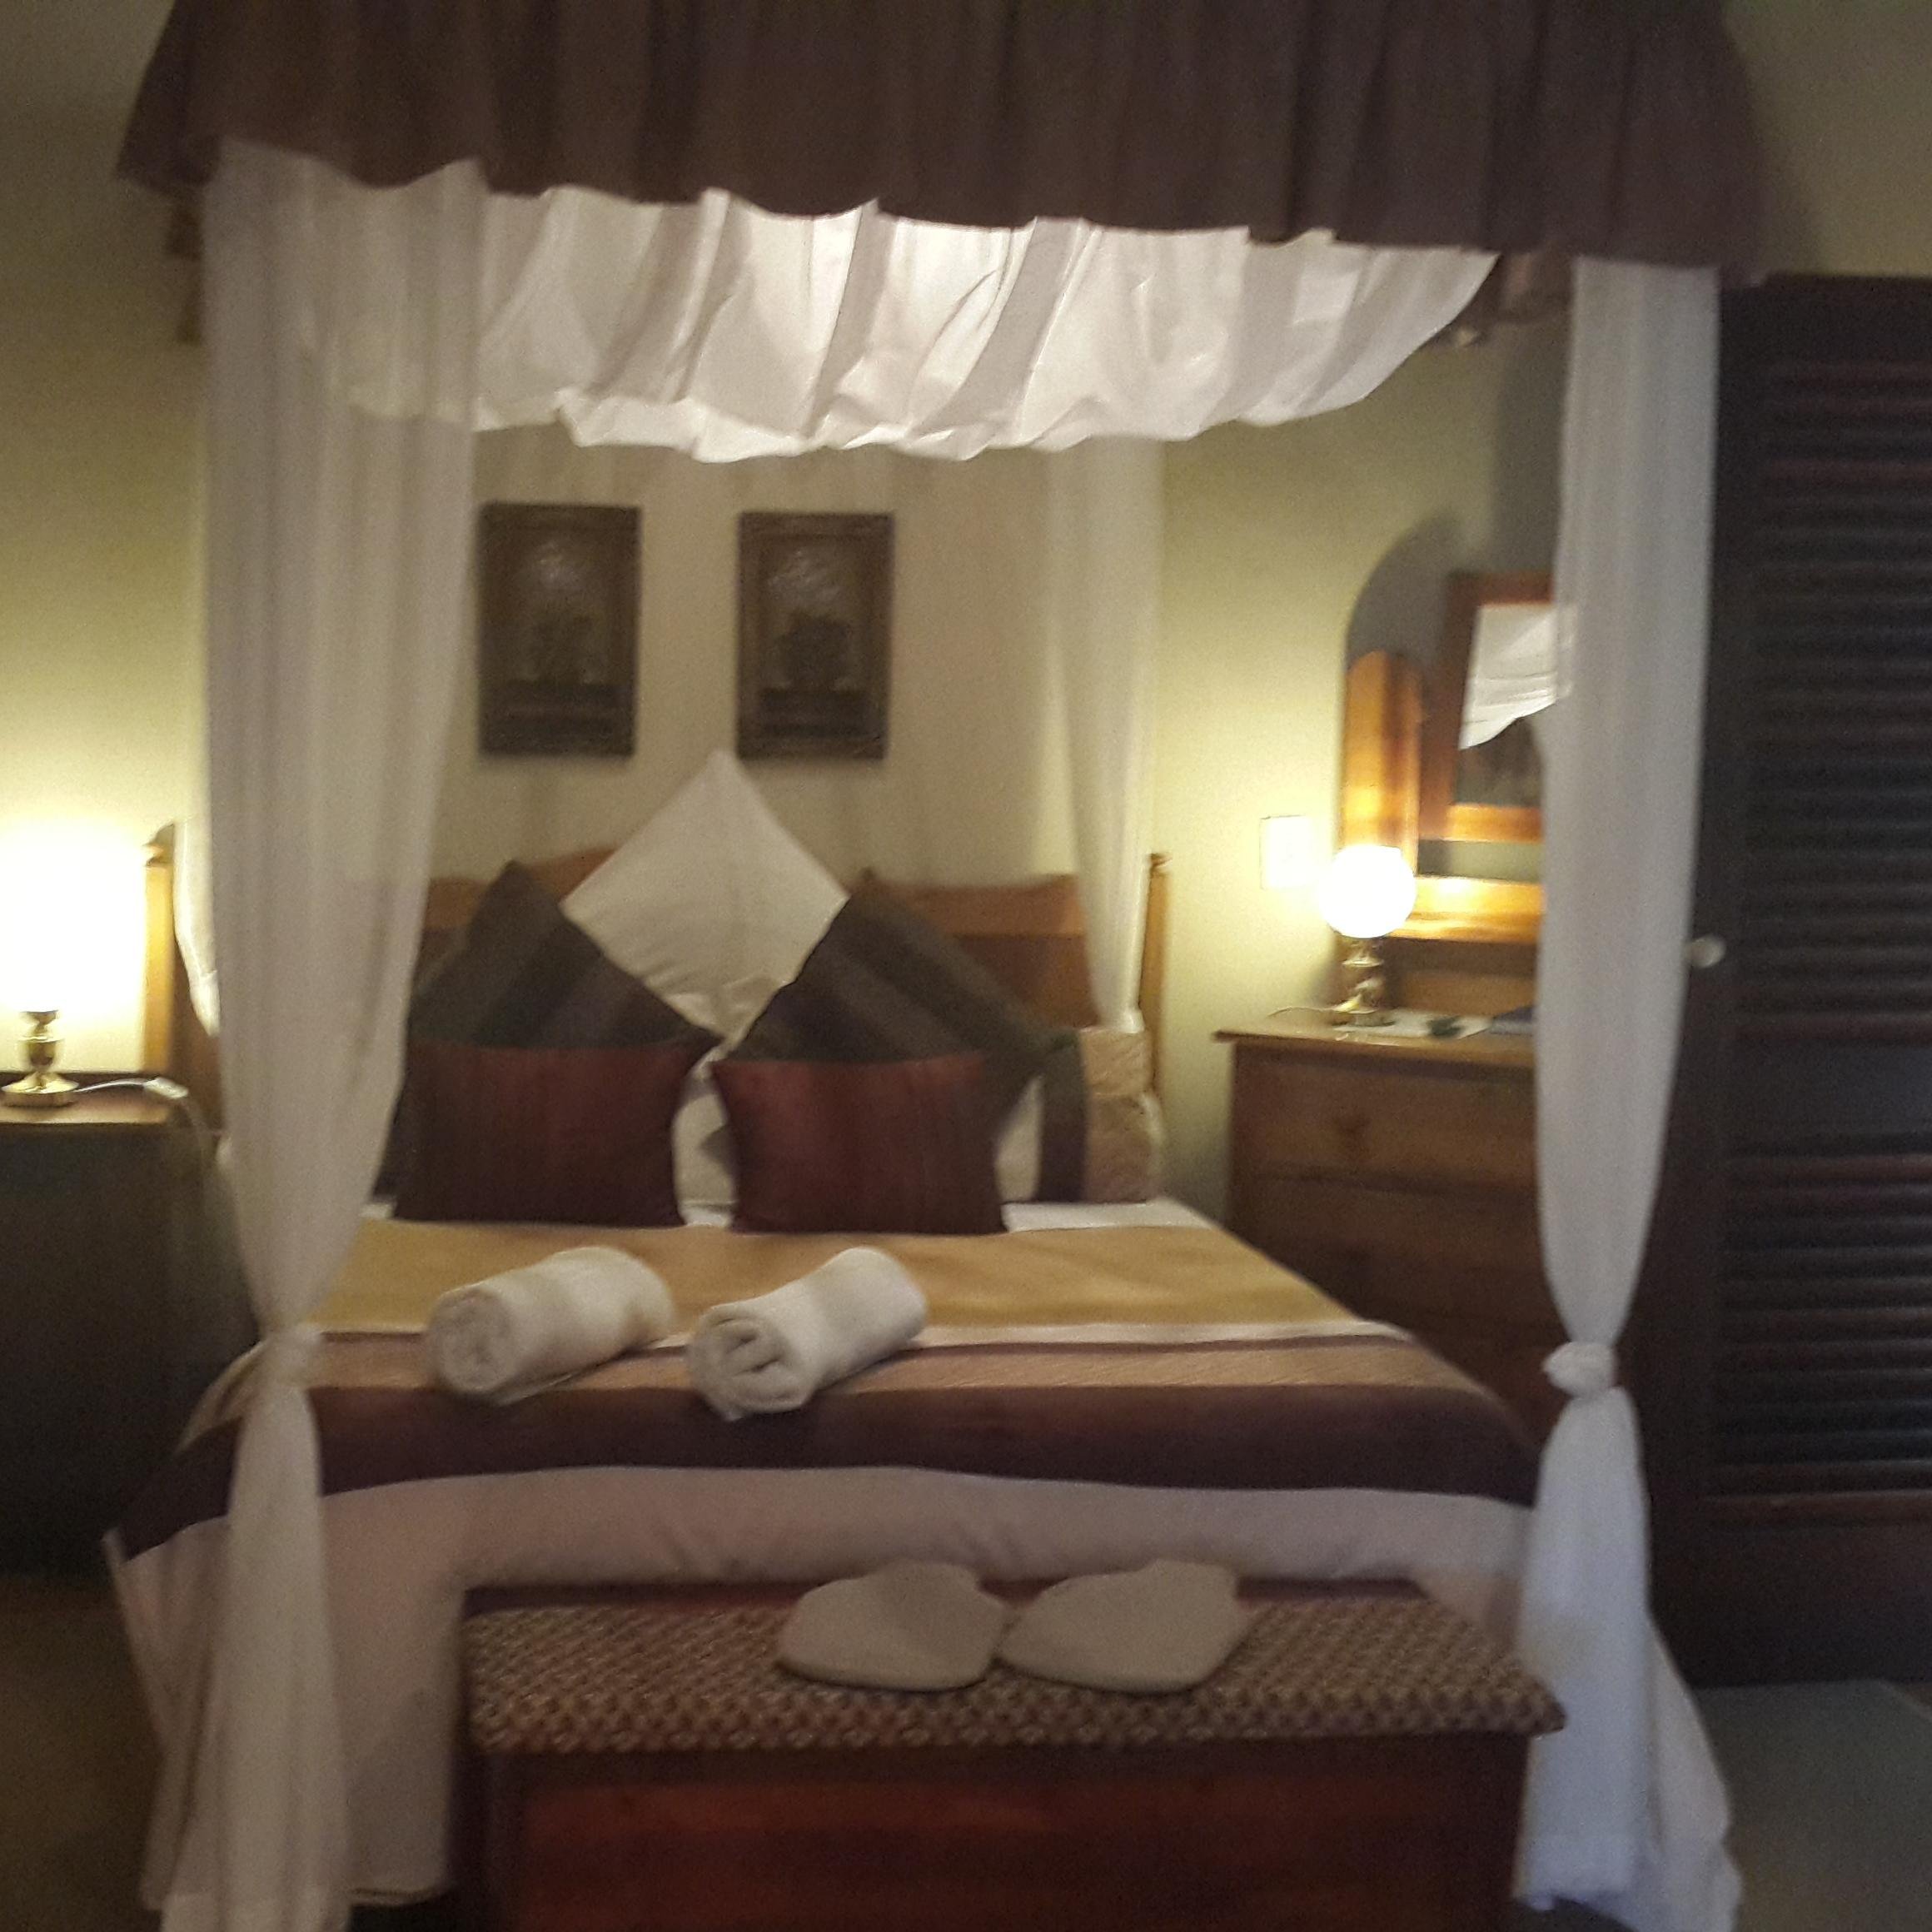 Knysna Manor House is a 3 star, AA Highly Recommended guesthouse. 13 rooms to suit your budget and need. Breakfast included. Self catering unit now available